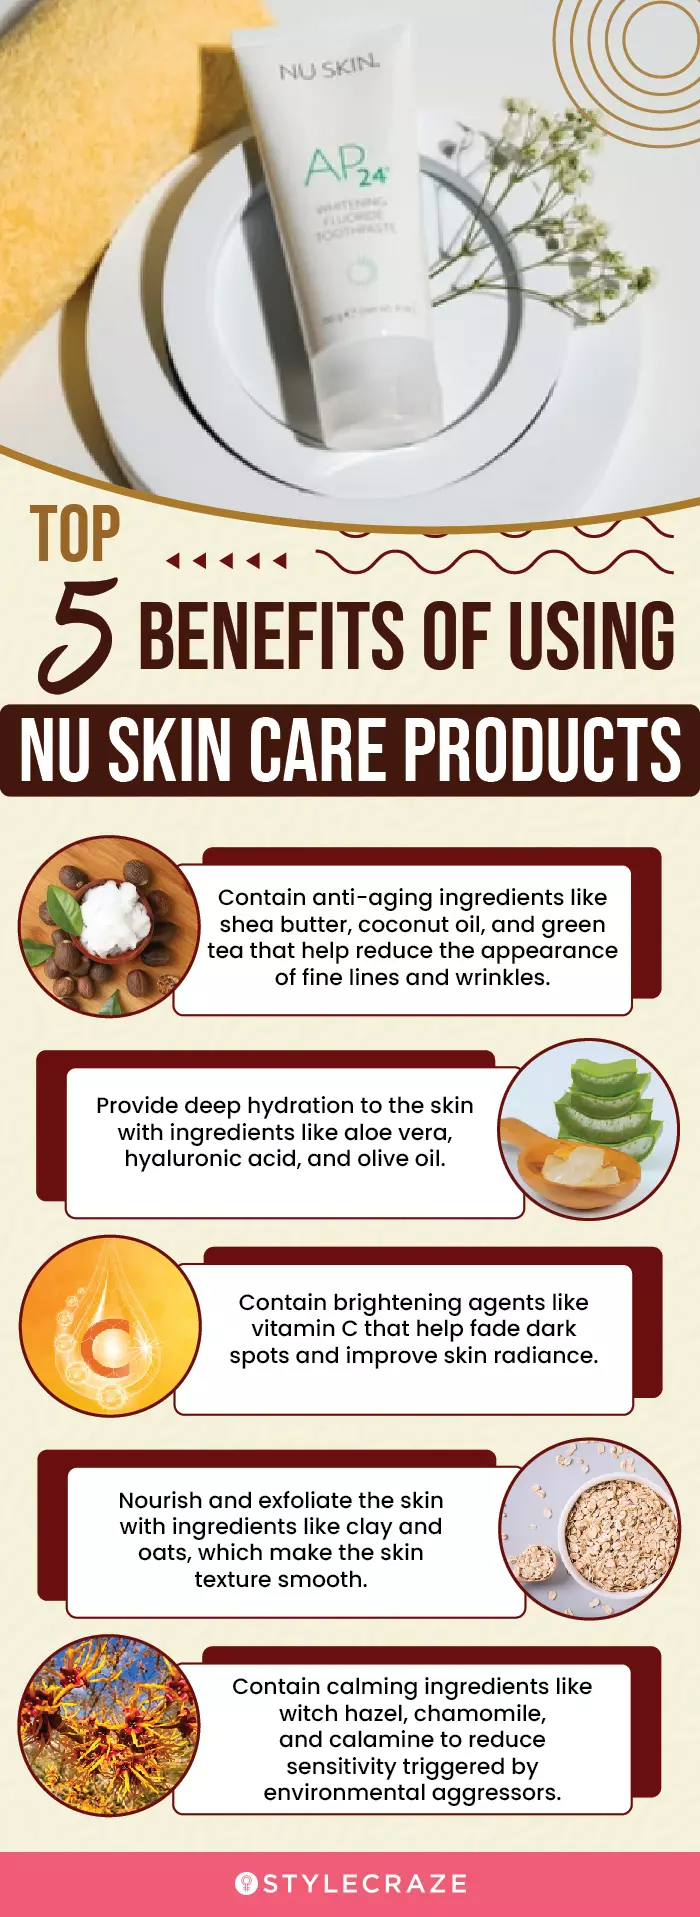 Top 5 Benefits Of Using Nu Skin Products (infographic)